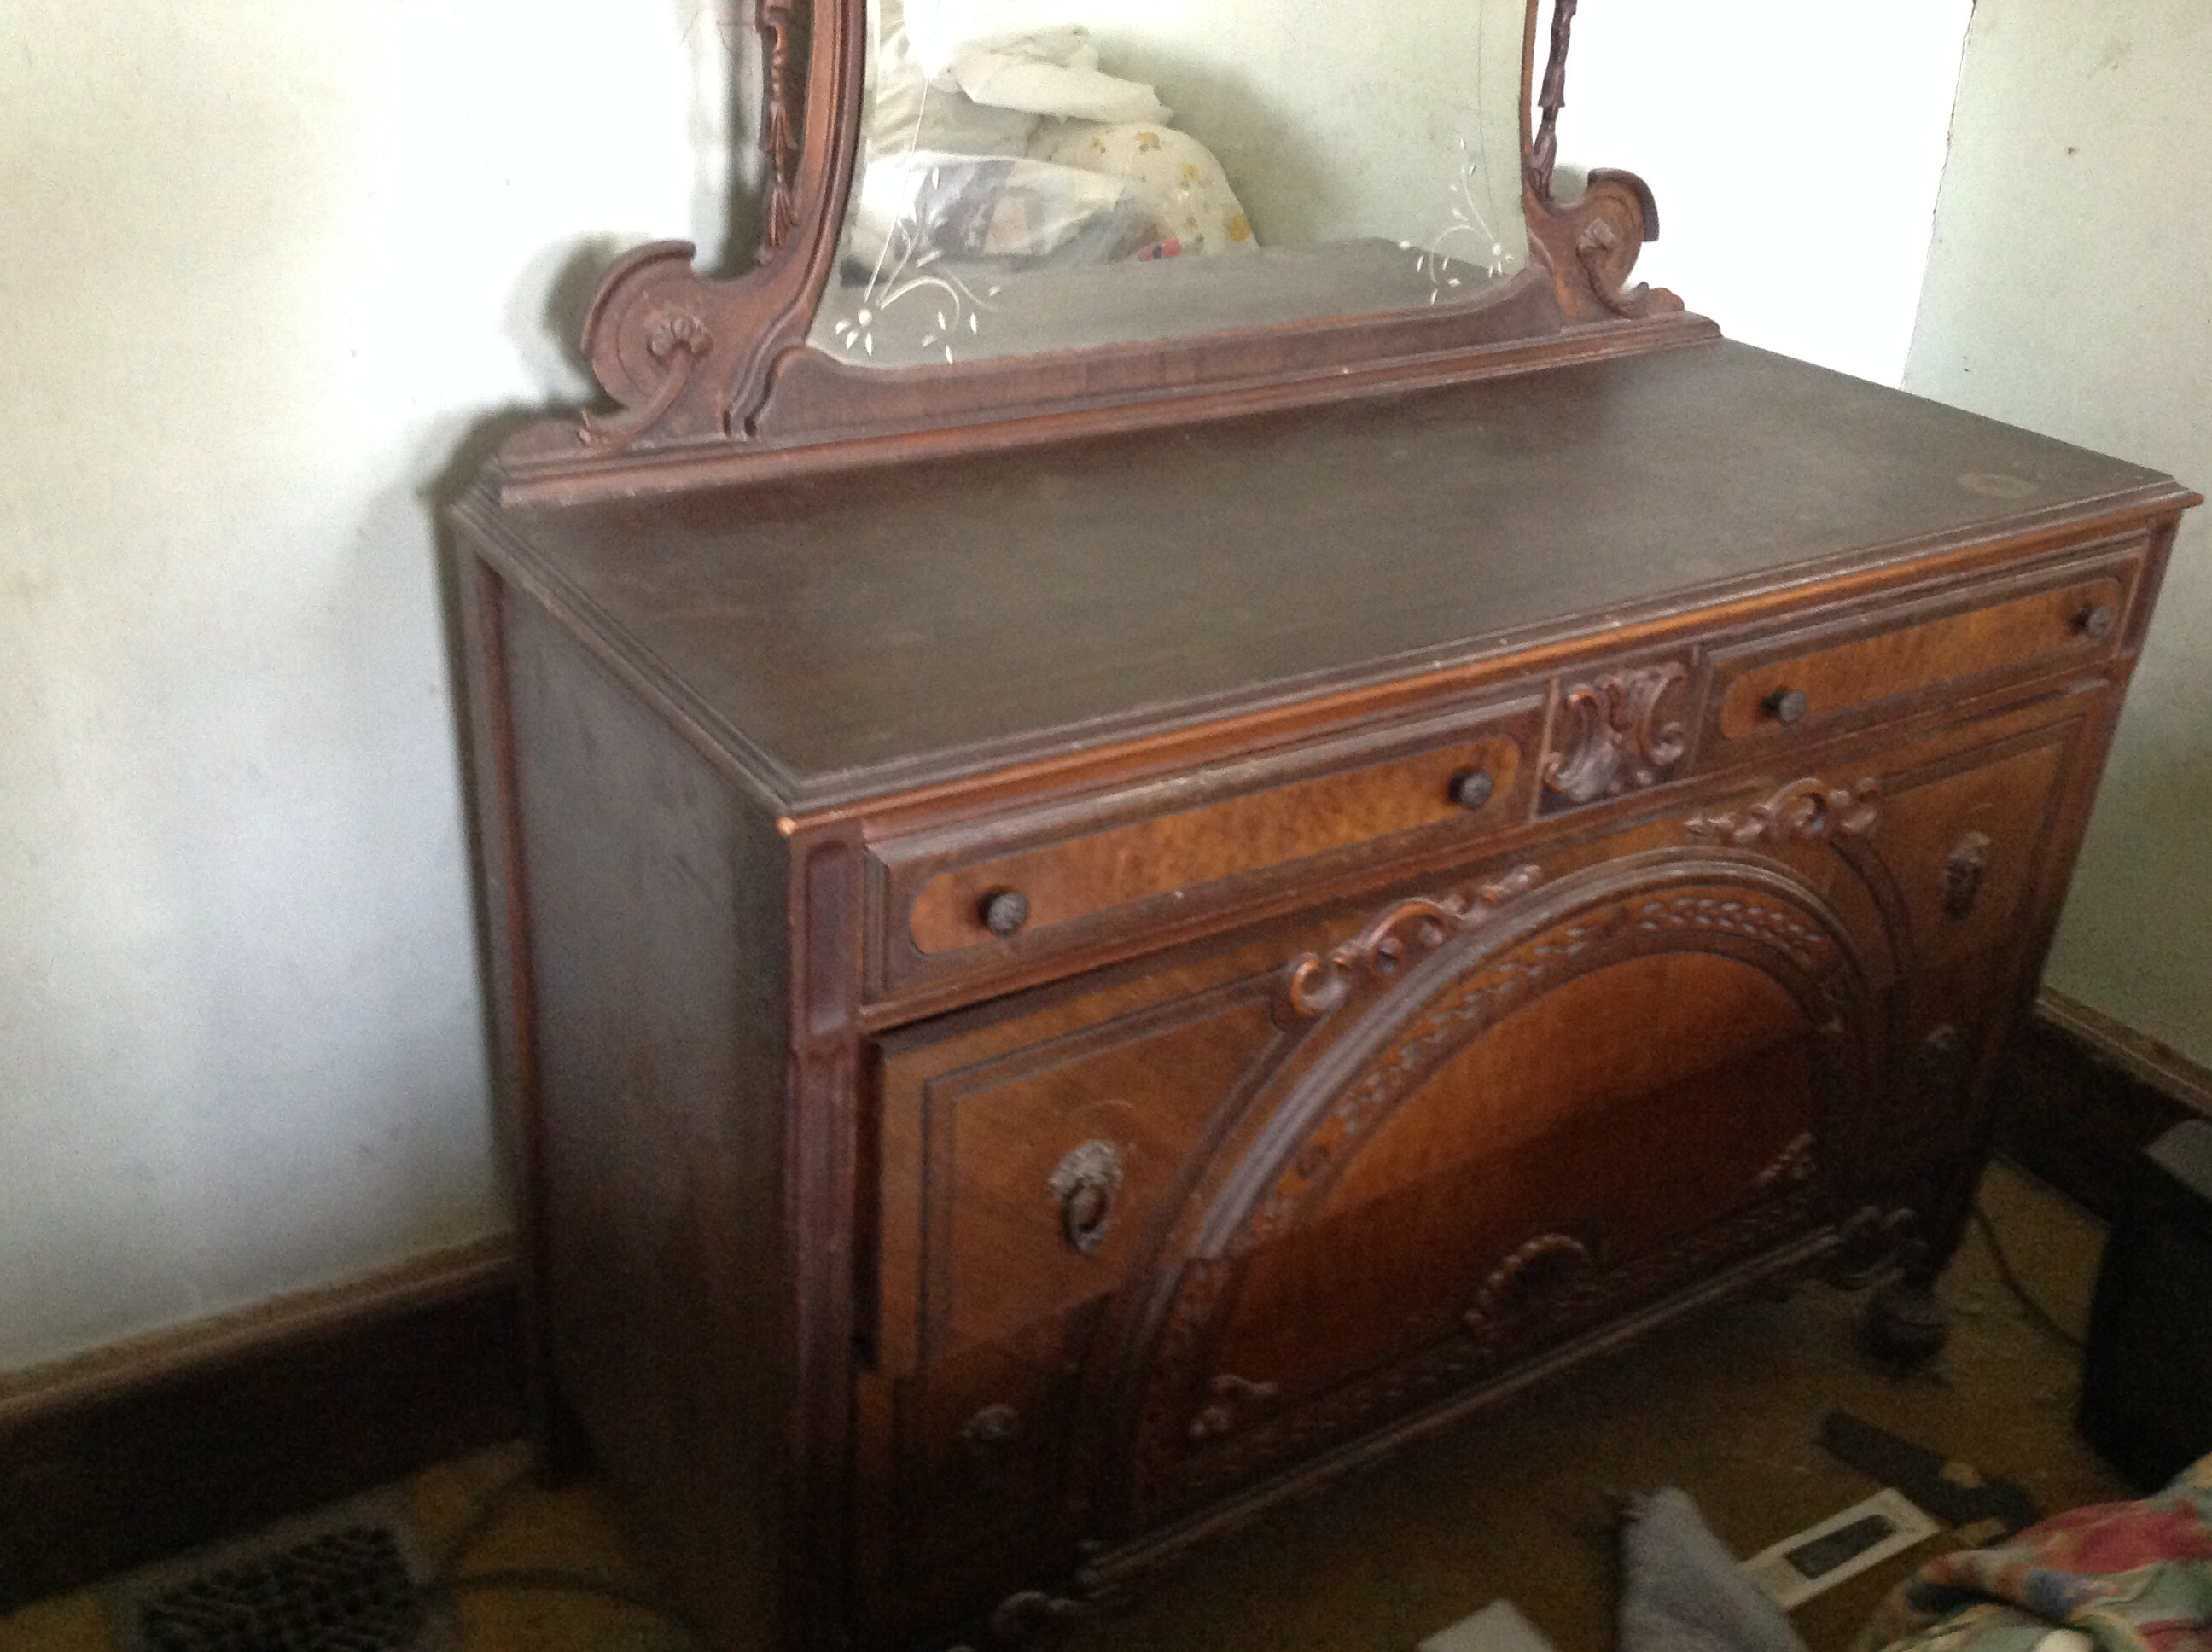 1920s Or 30s Bedroom Furniture Antique Appraisal Instappraisal within size 2592 X 1936